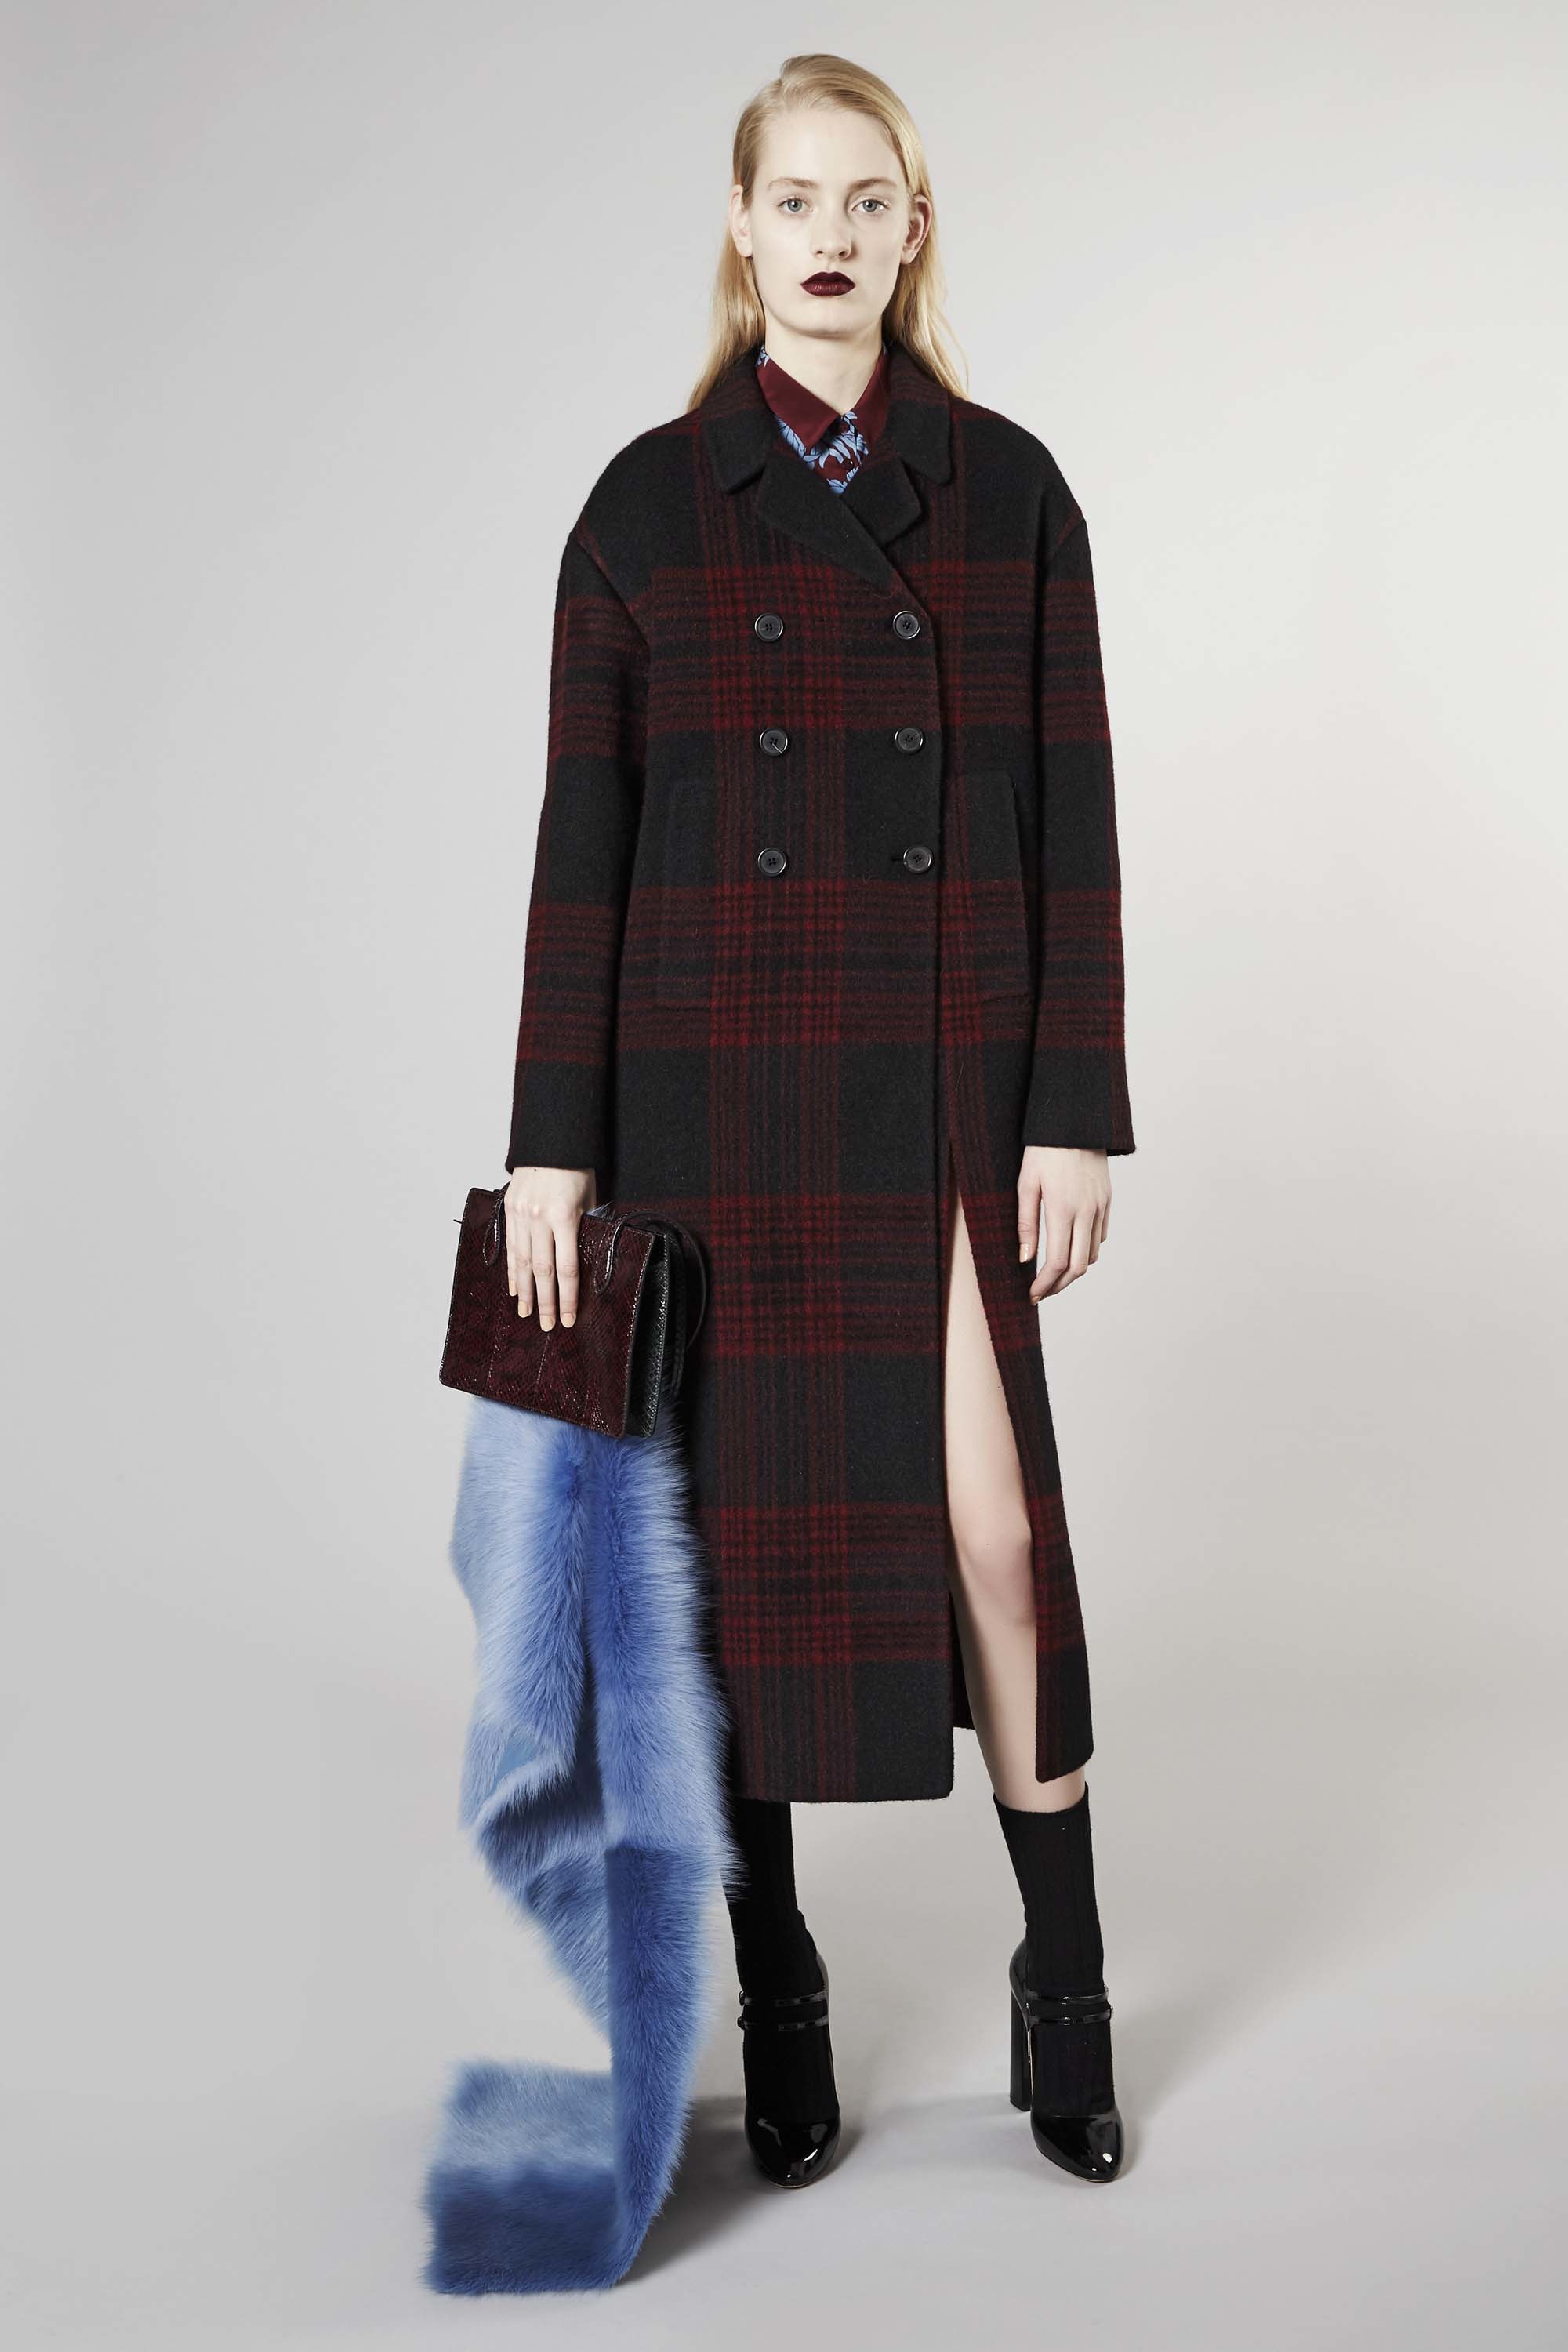 Show Review: Top 5 Runway Trends from Pre-Fall 2016